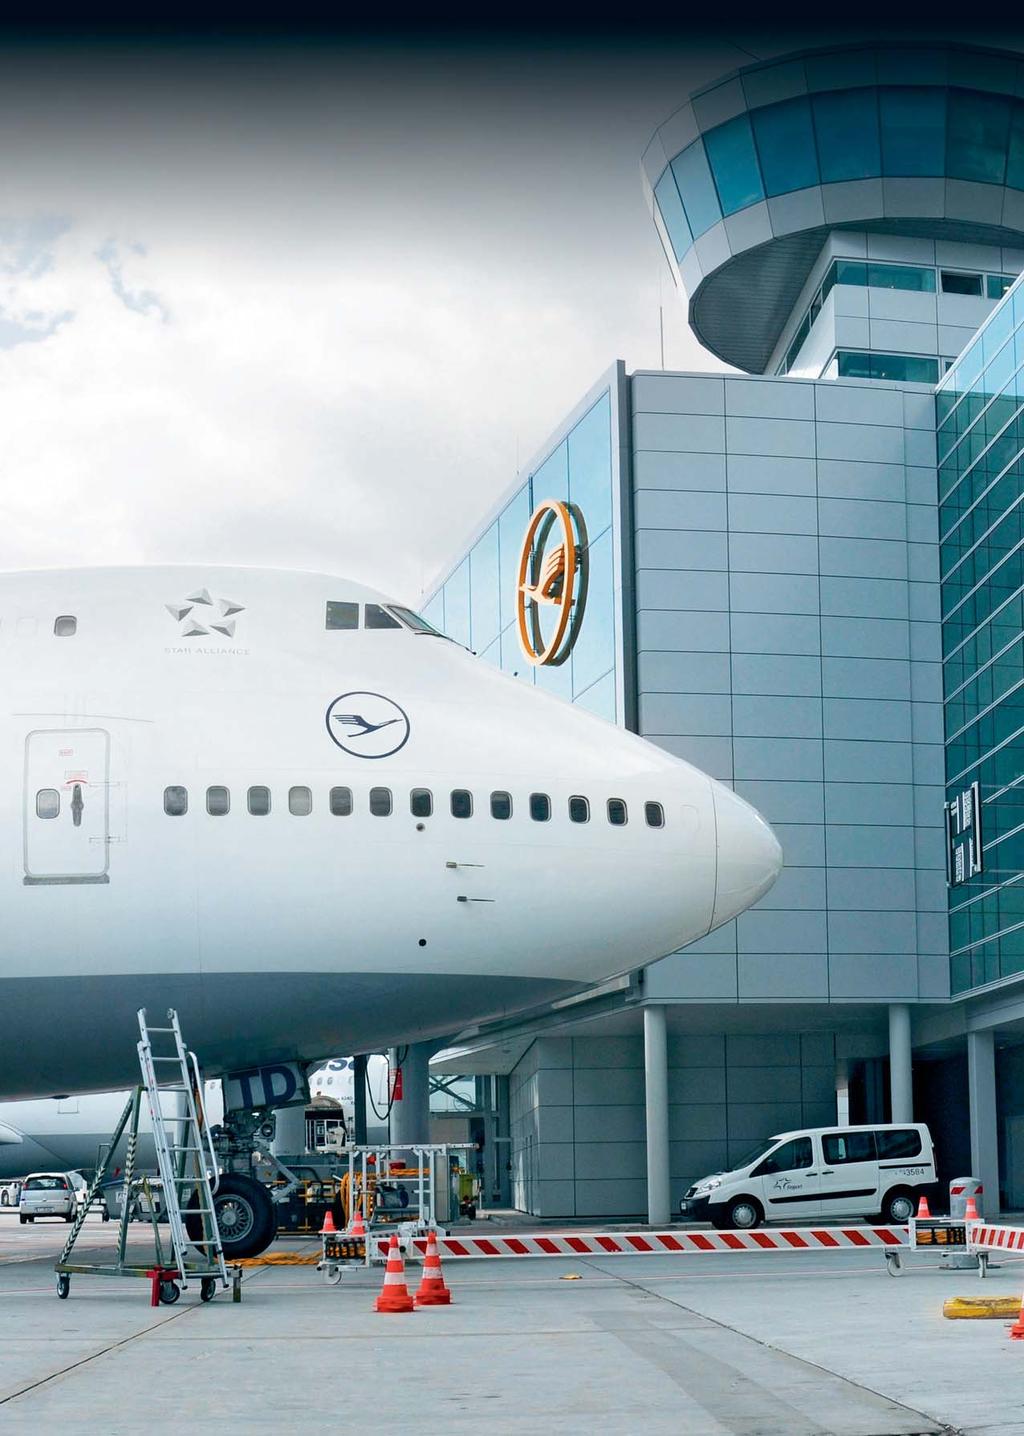 With more than 0 million passengers, Frankfurt Airport is a global hub for international air traffic.